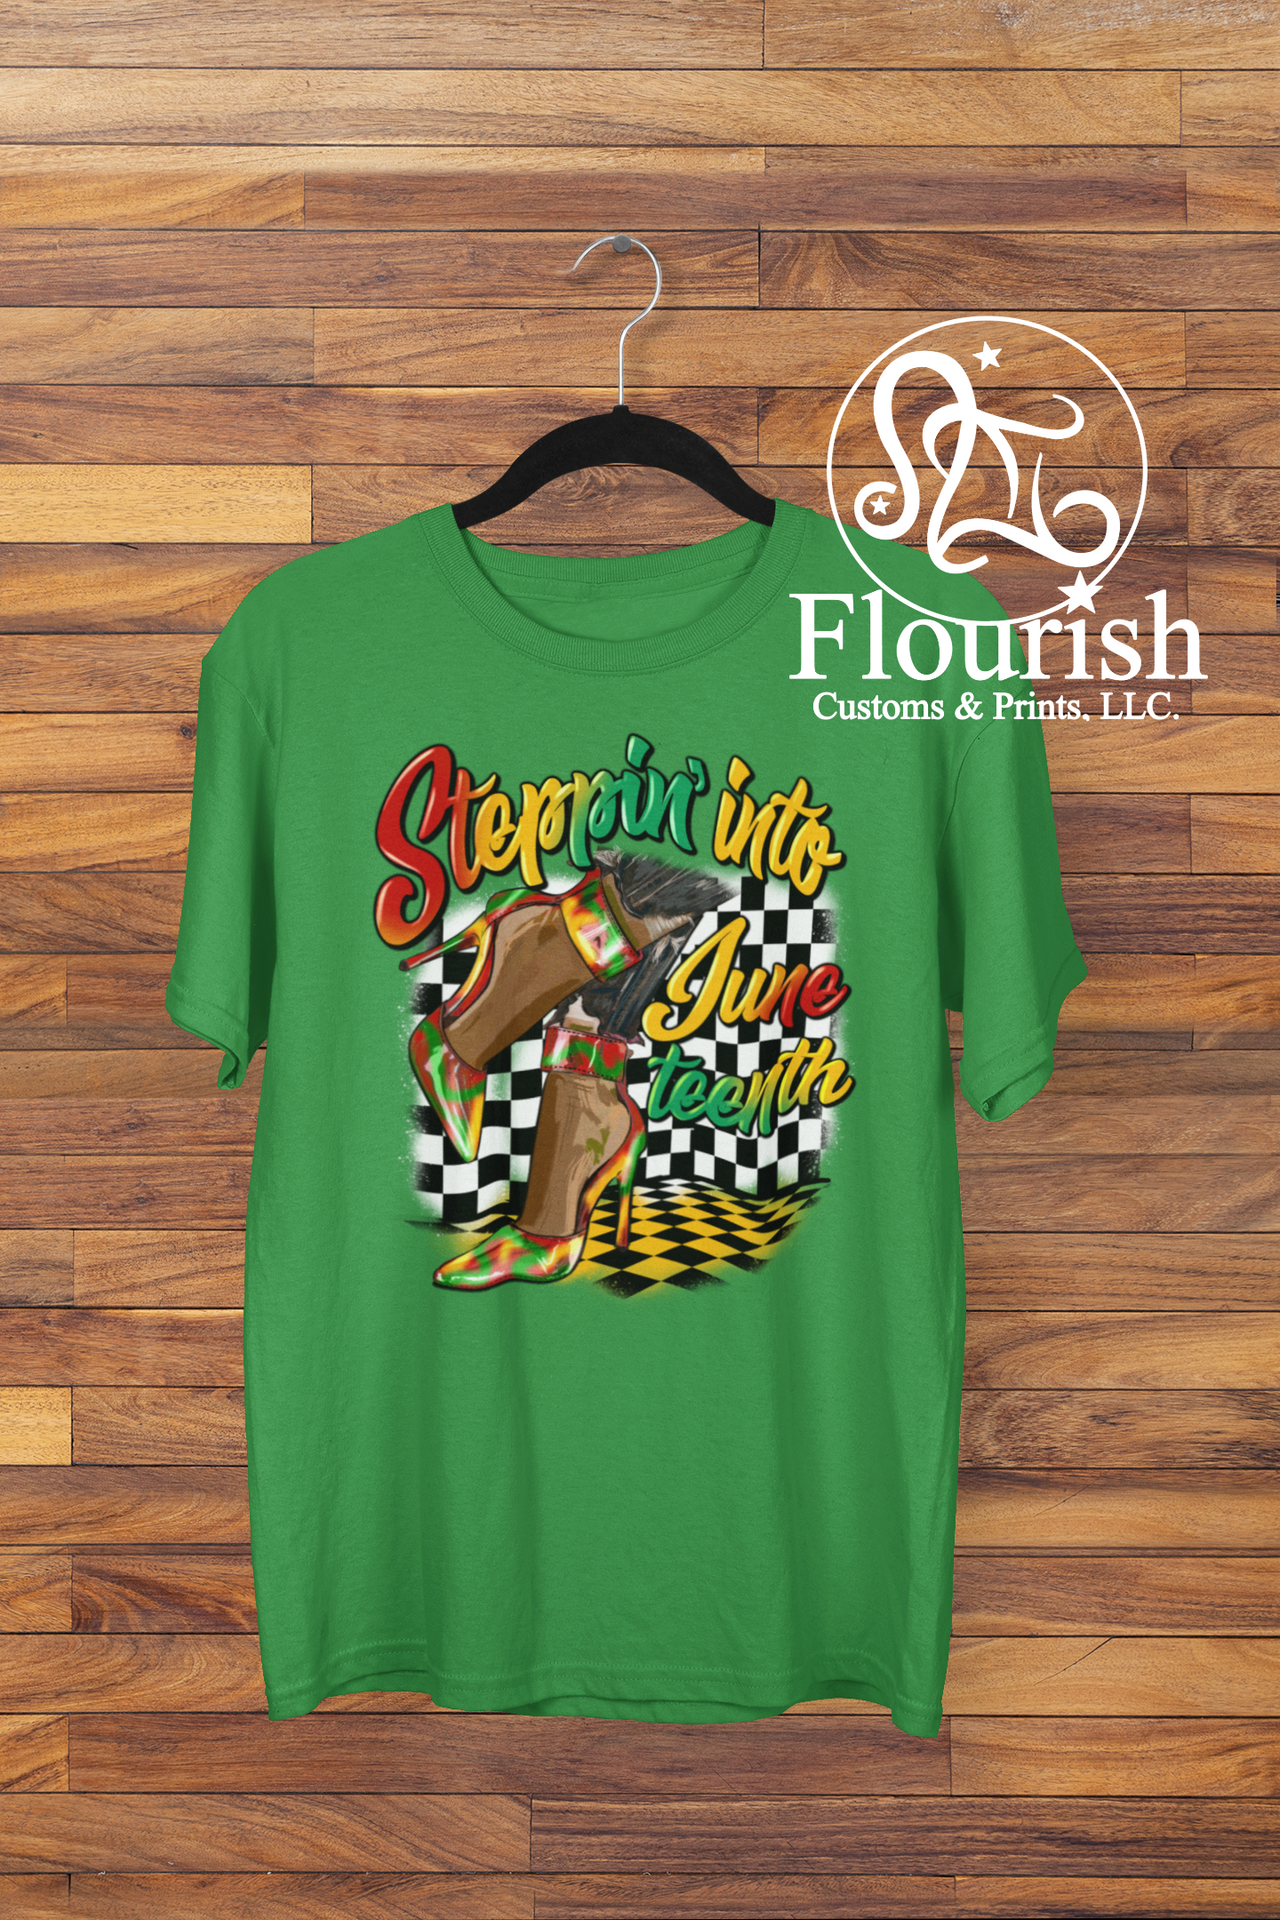 Steppin' In To Juneteenth (Female) Tee